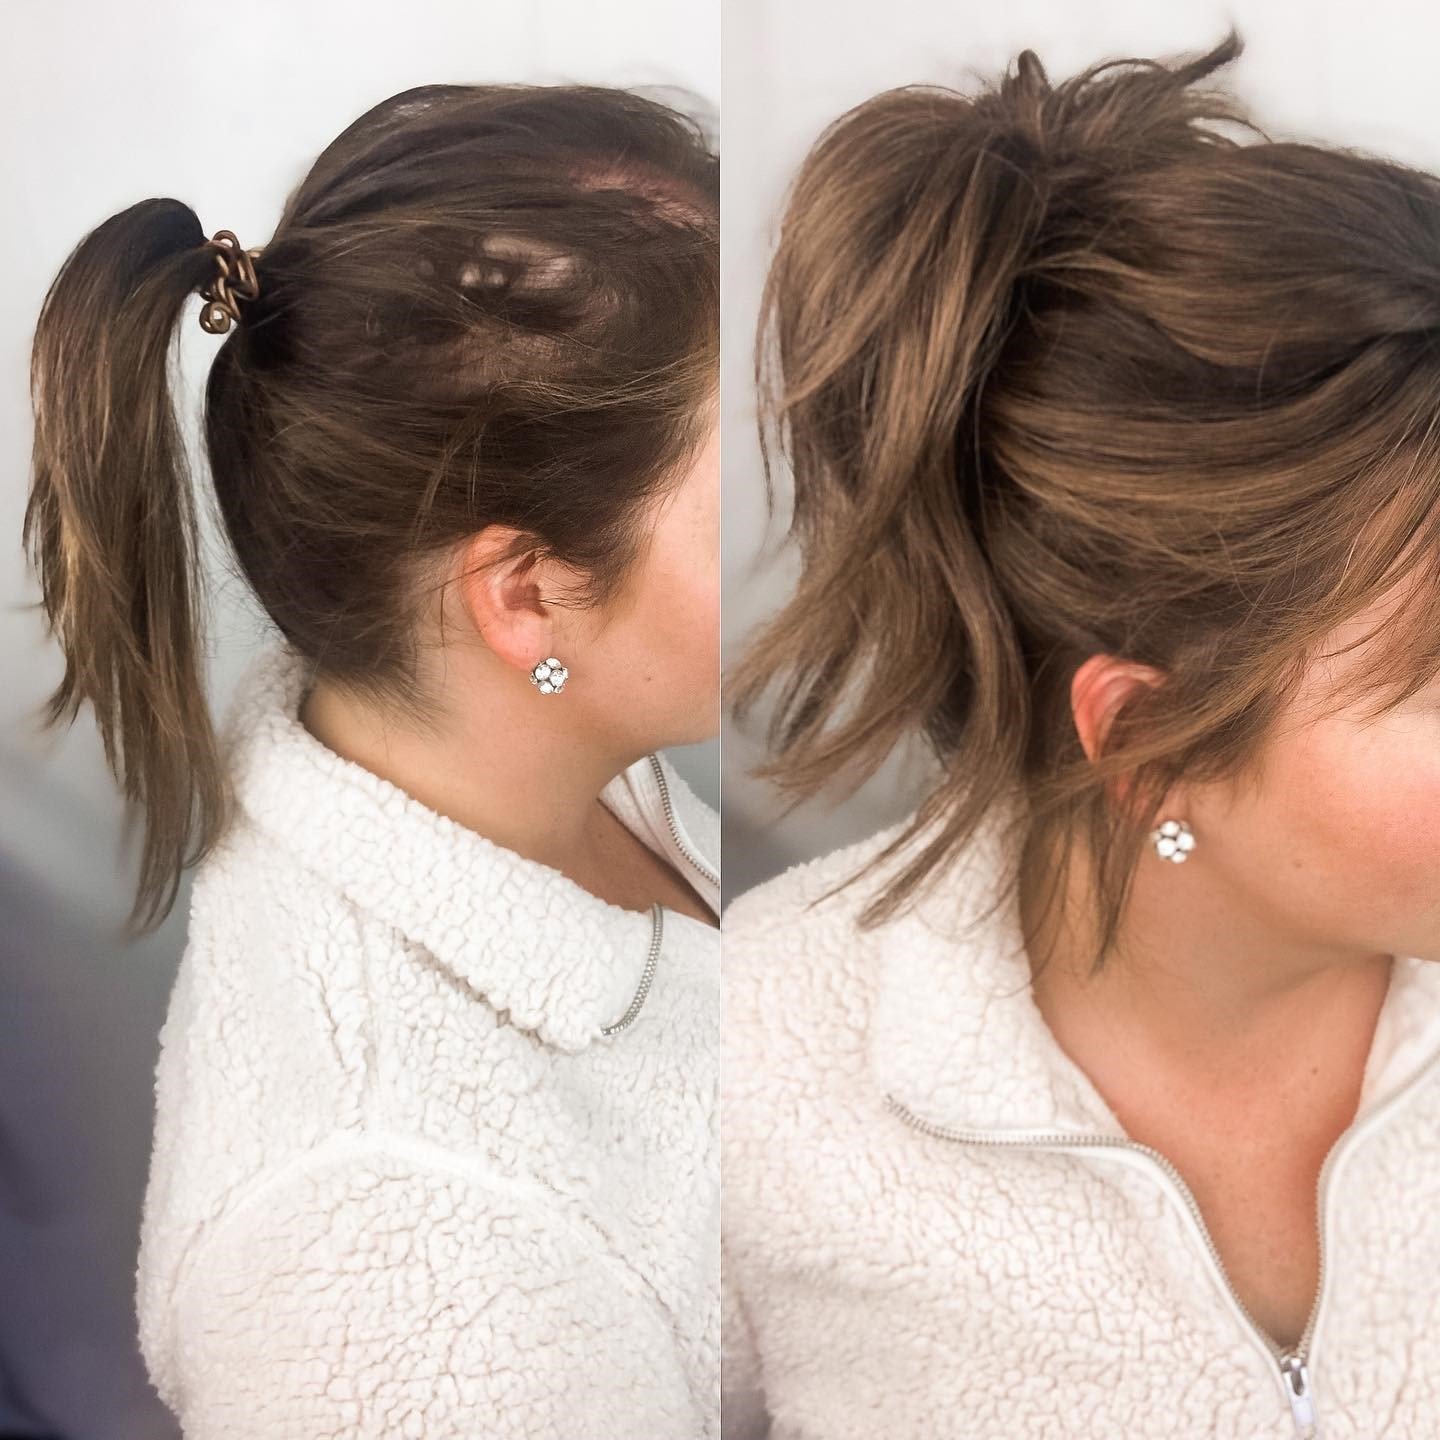 HOW TO GET A MESSY HIGH PONYTAIL WITH A TOPPER